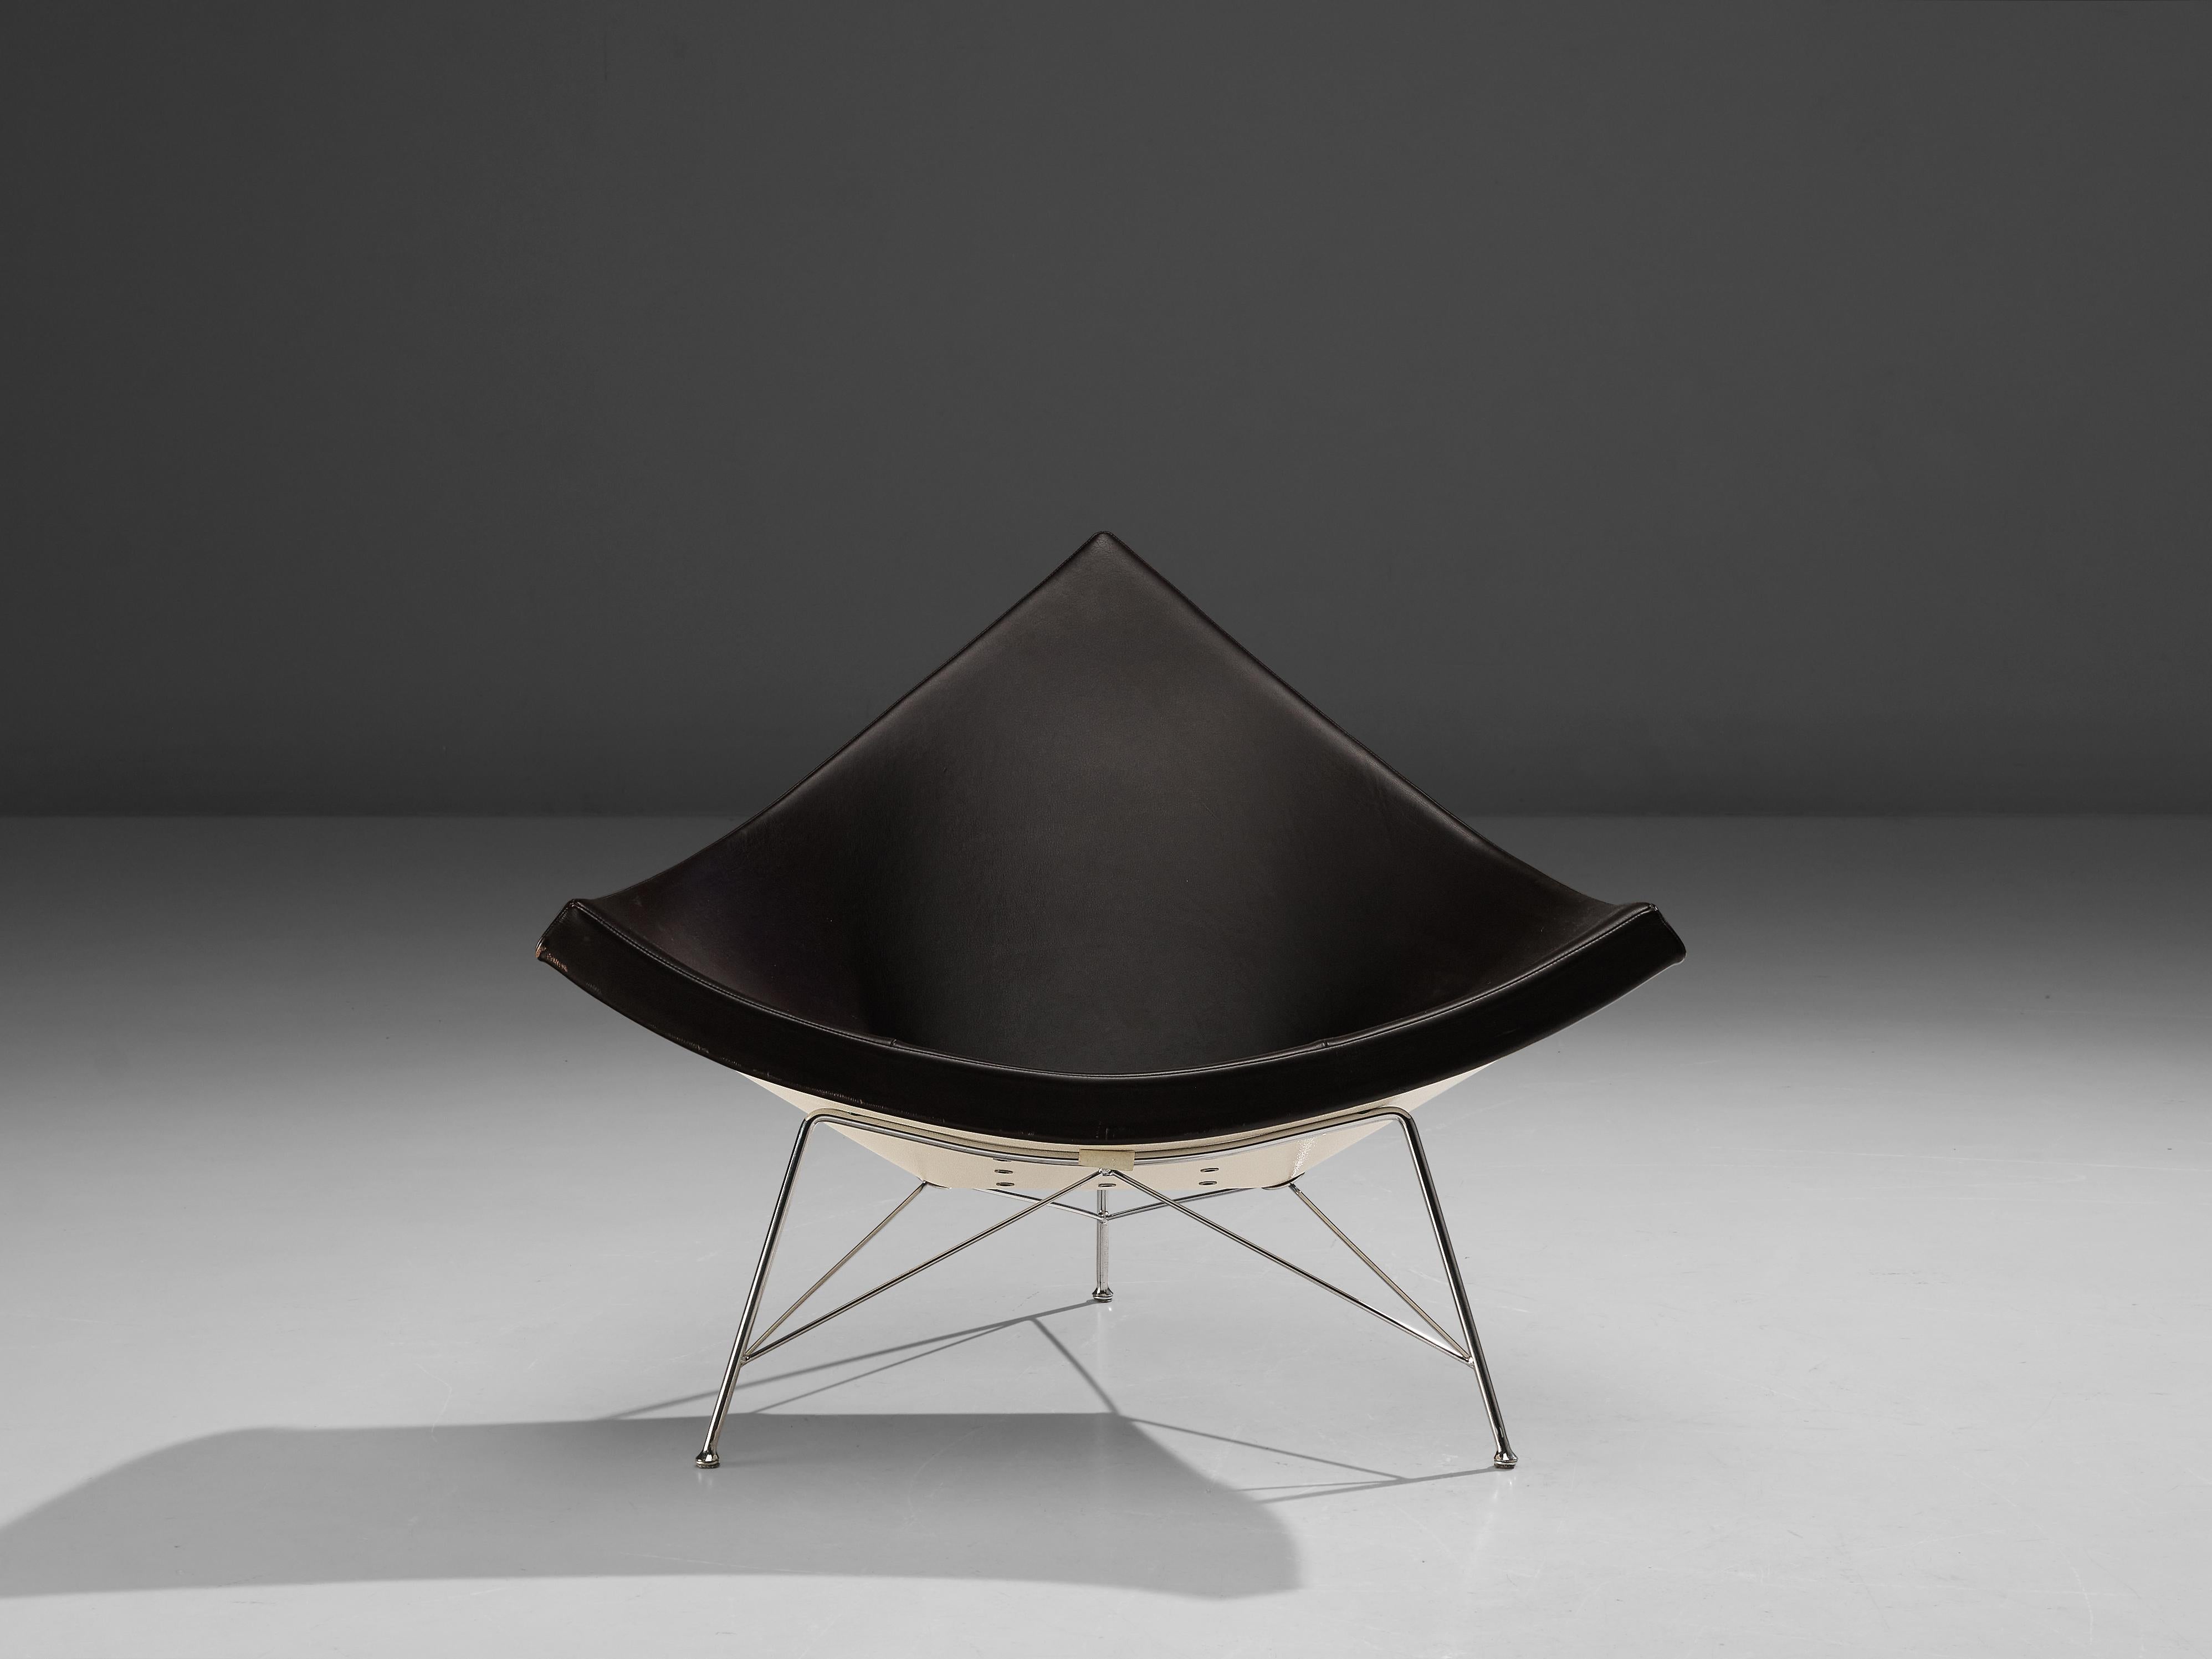 George Nelson, ‘Coconut’ lounge chair, fiberglass, leather upholstery, steel, United States, design 1955, later production

The ‘Coconut’ lounge chair is one of George Nelson’s iconic designs. Nelson took inspiration for this particular shape from a